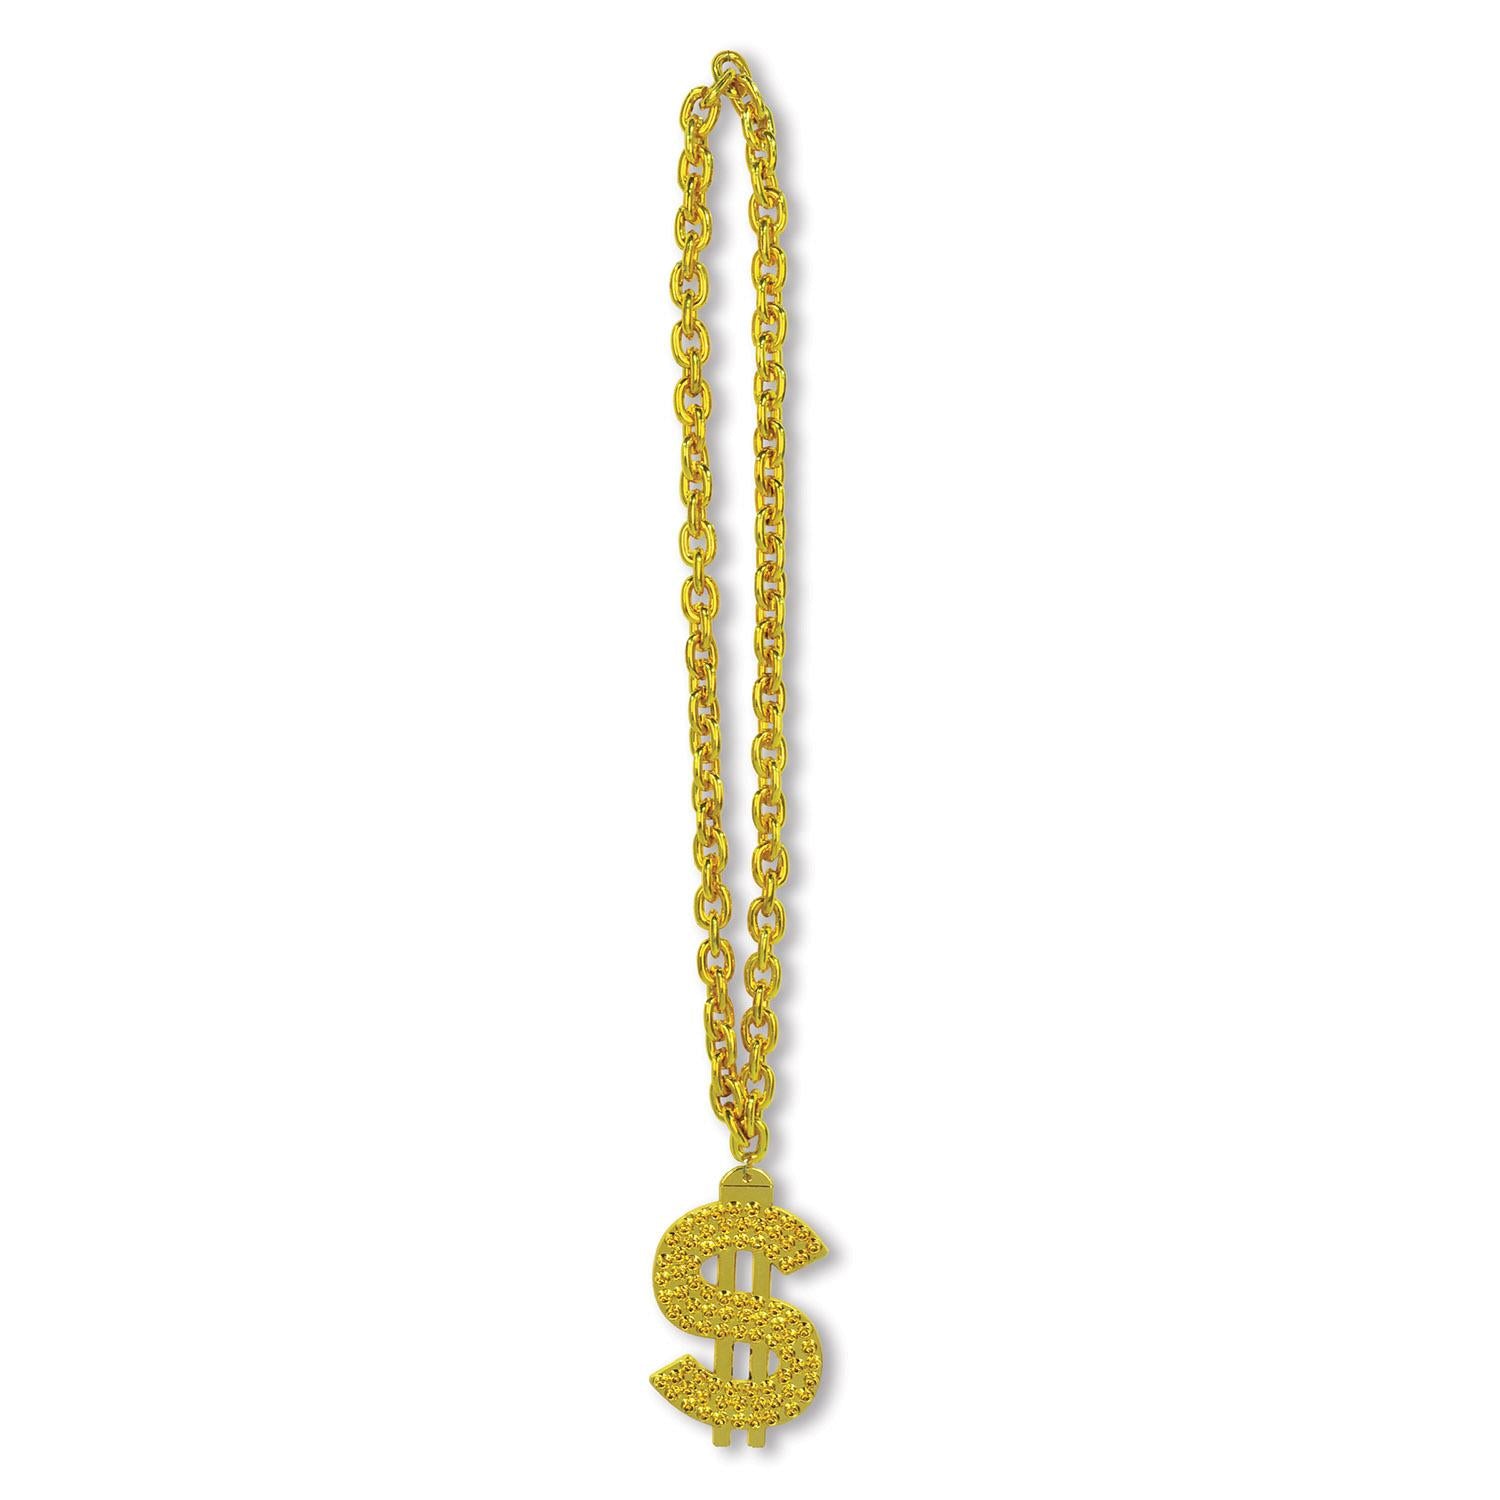 Gold Chain Party Bead Necklaces with $ Medallion (12 per Case)